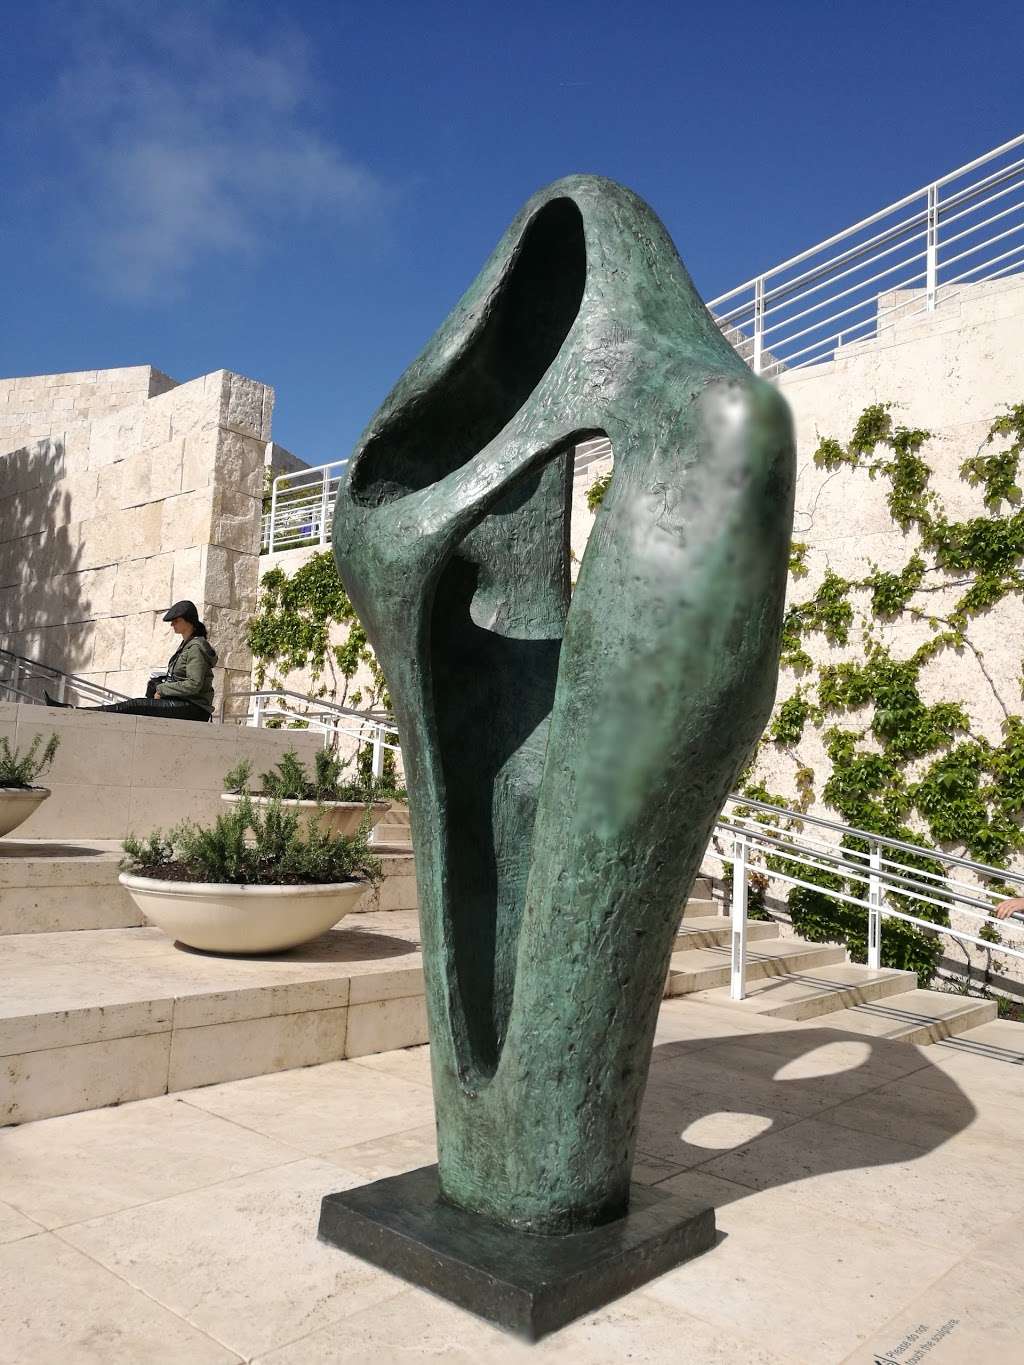 Getty Publications | 1200 Getty Center Dr #403, Los Angeles, CA 90049 | Phone: (310) 440-7365